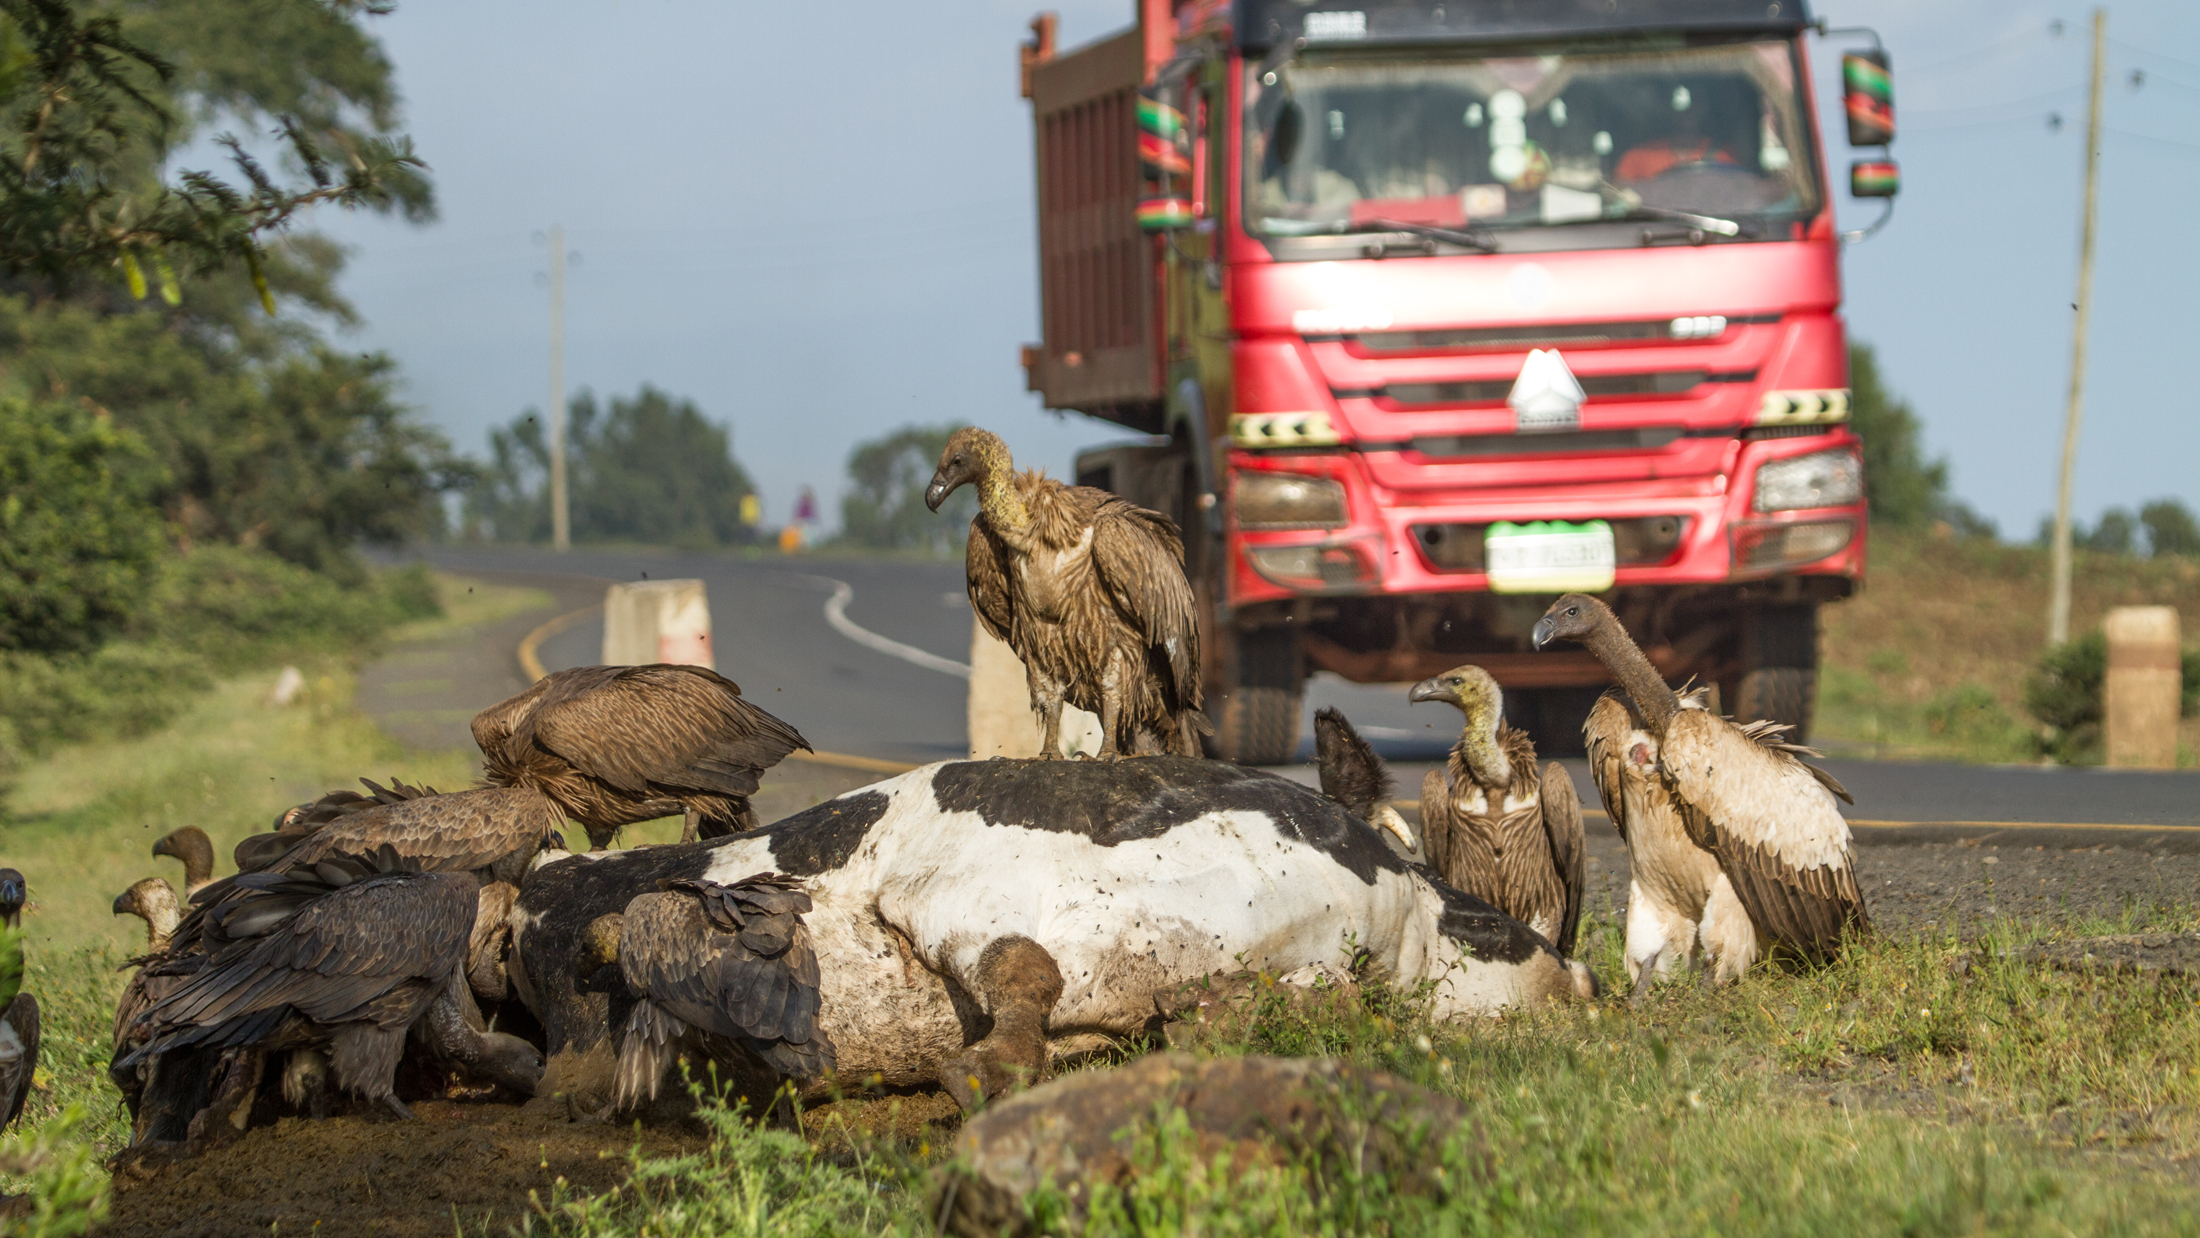 Vultures in crisis: poachers and poison threaten nature's garbage disposers